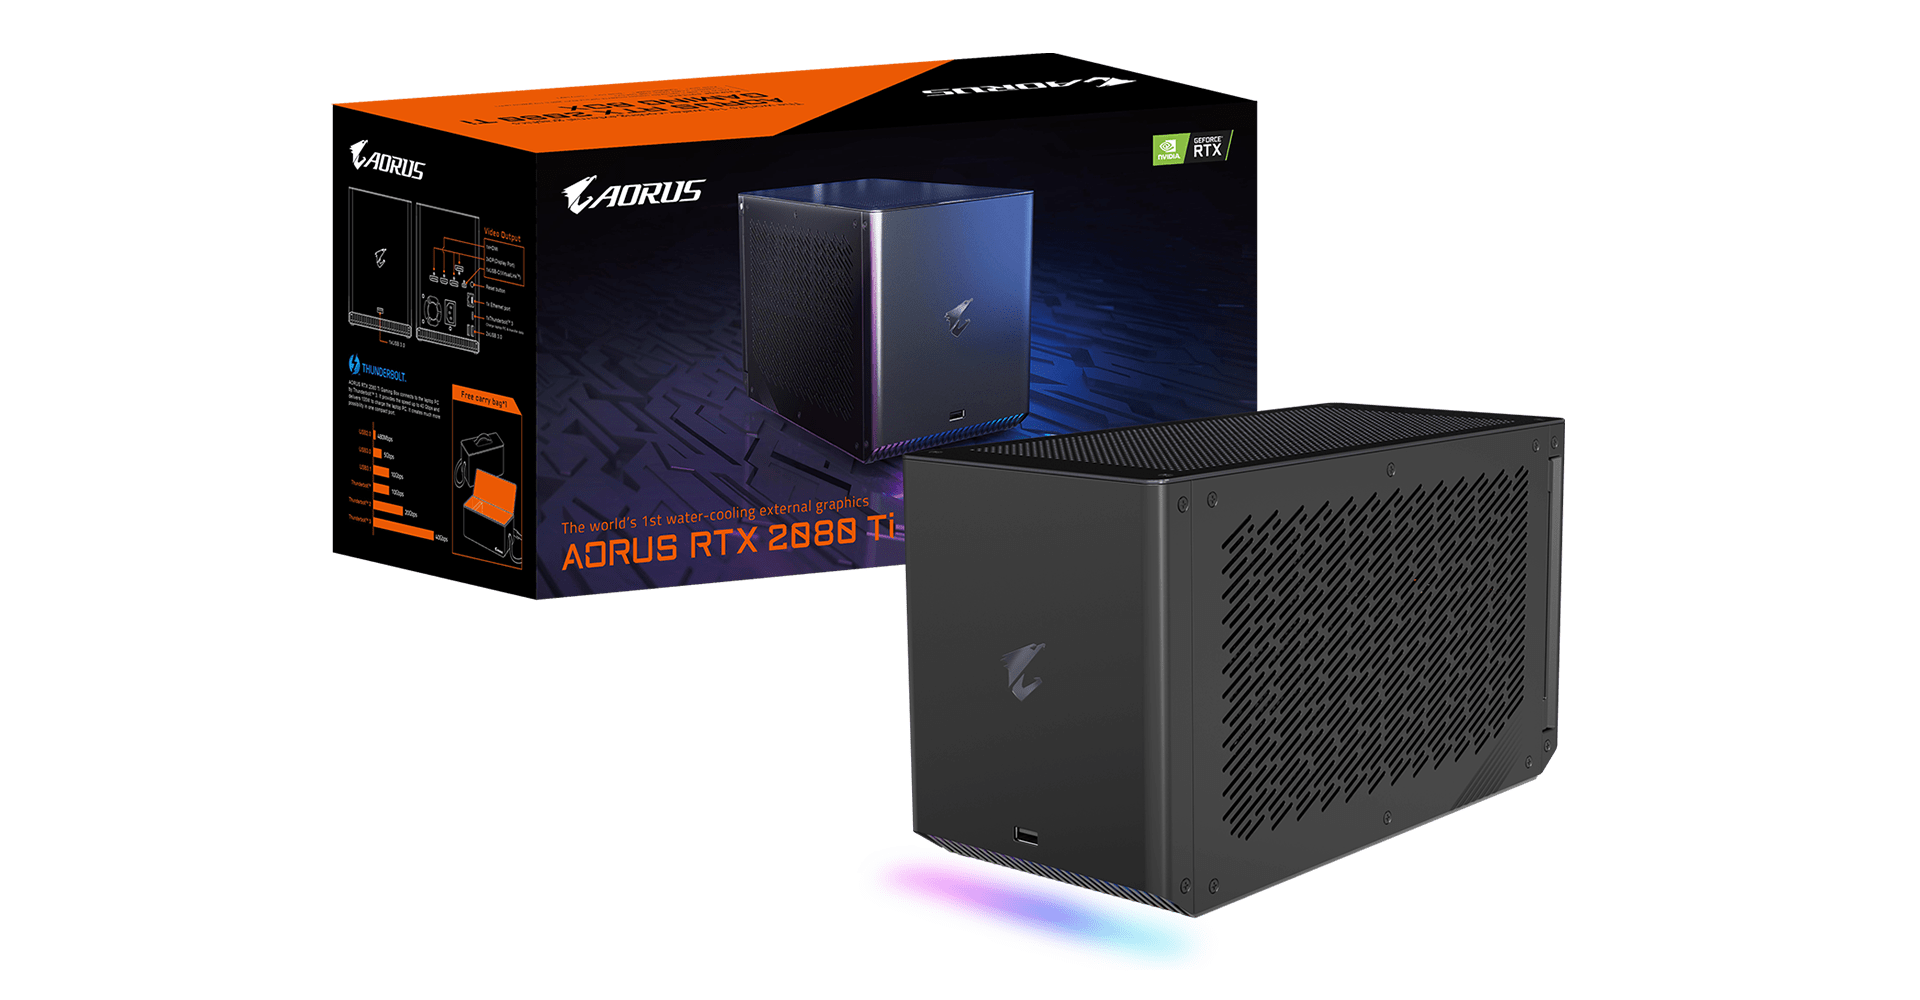 Gigabyte’s Upcoming Aorus Gaming Box Comes With Liquid-Cooled RTX 2080 Ti Without Overclocking